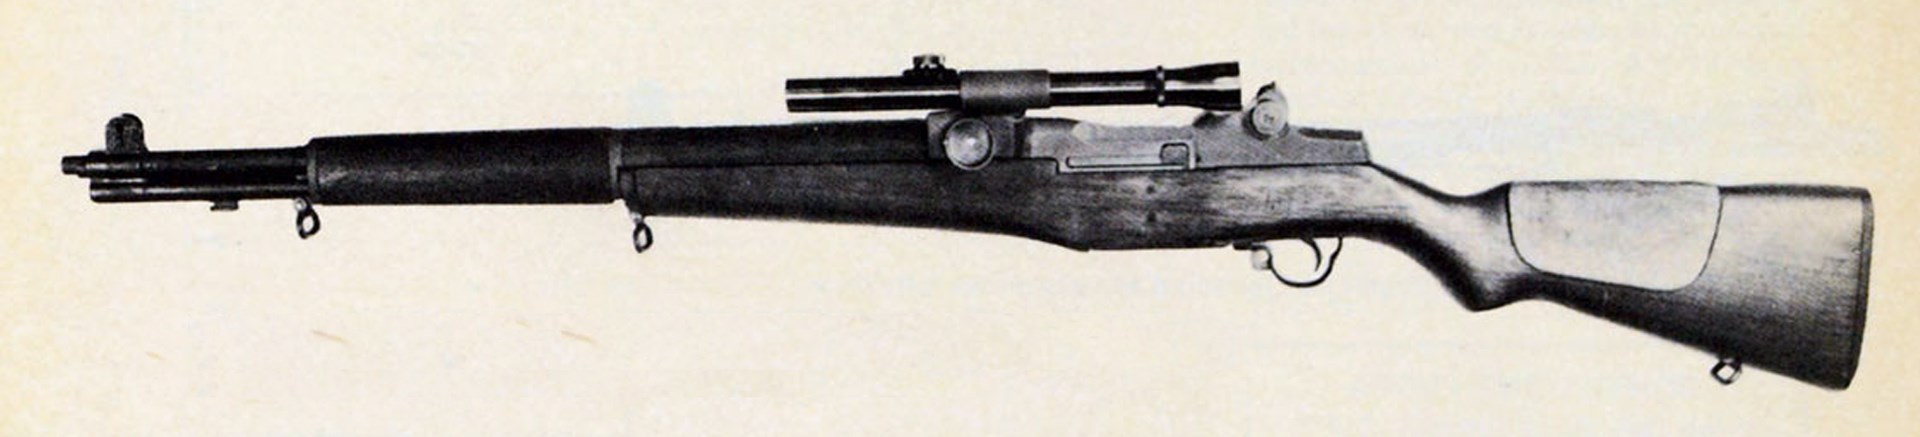 Adjustable cheekpiece shown flush with stock for iron sight use.